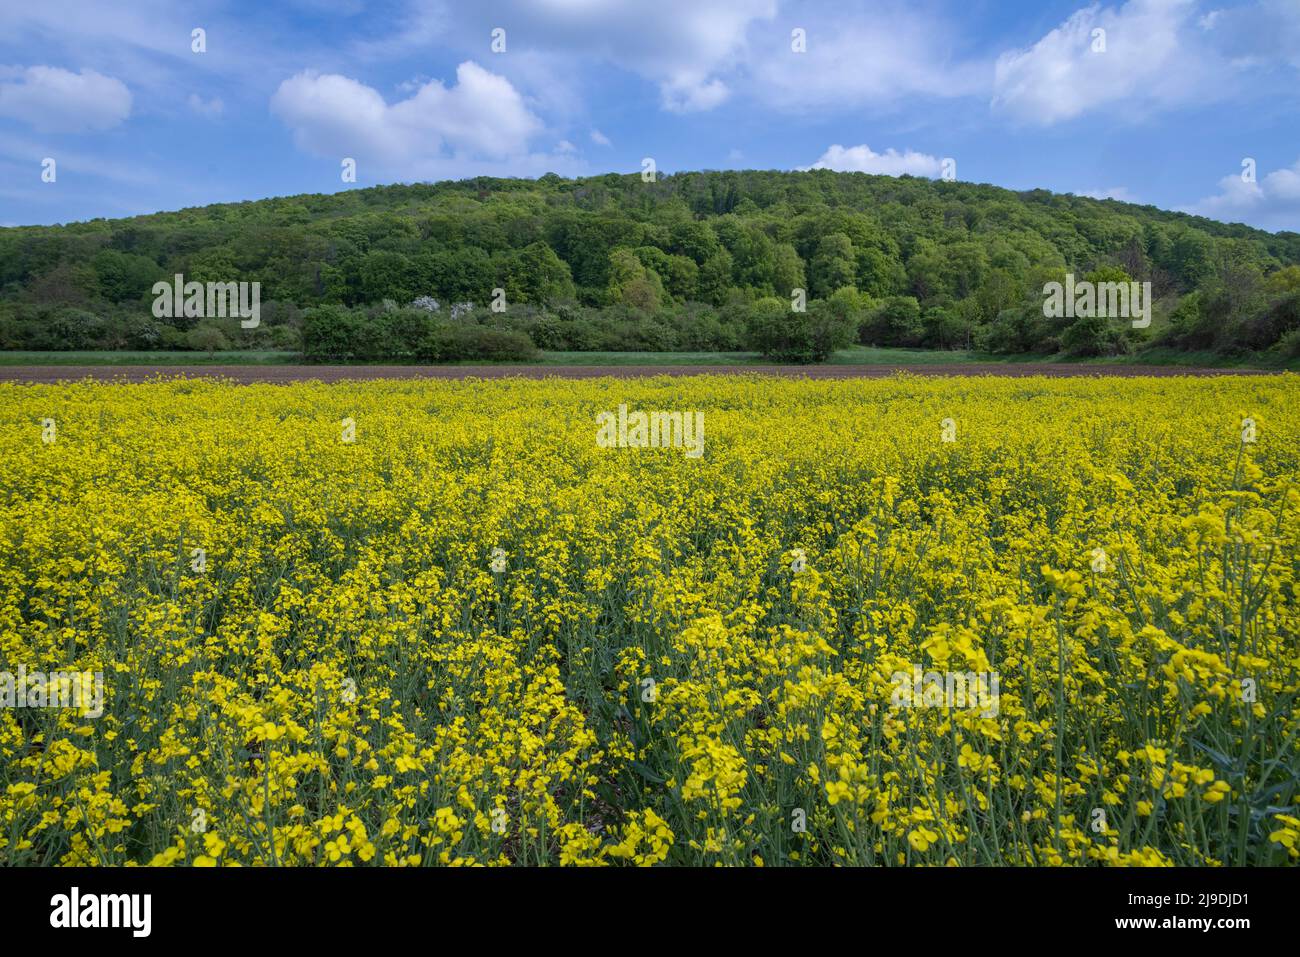 field of rapeseed (Brassica napus) with forested hill behind, near Donauworth, Franconia, Germany Stock Photo